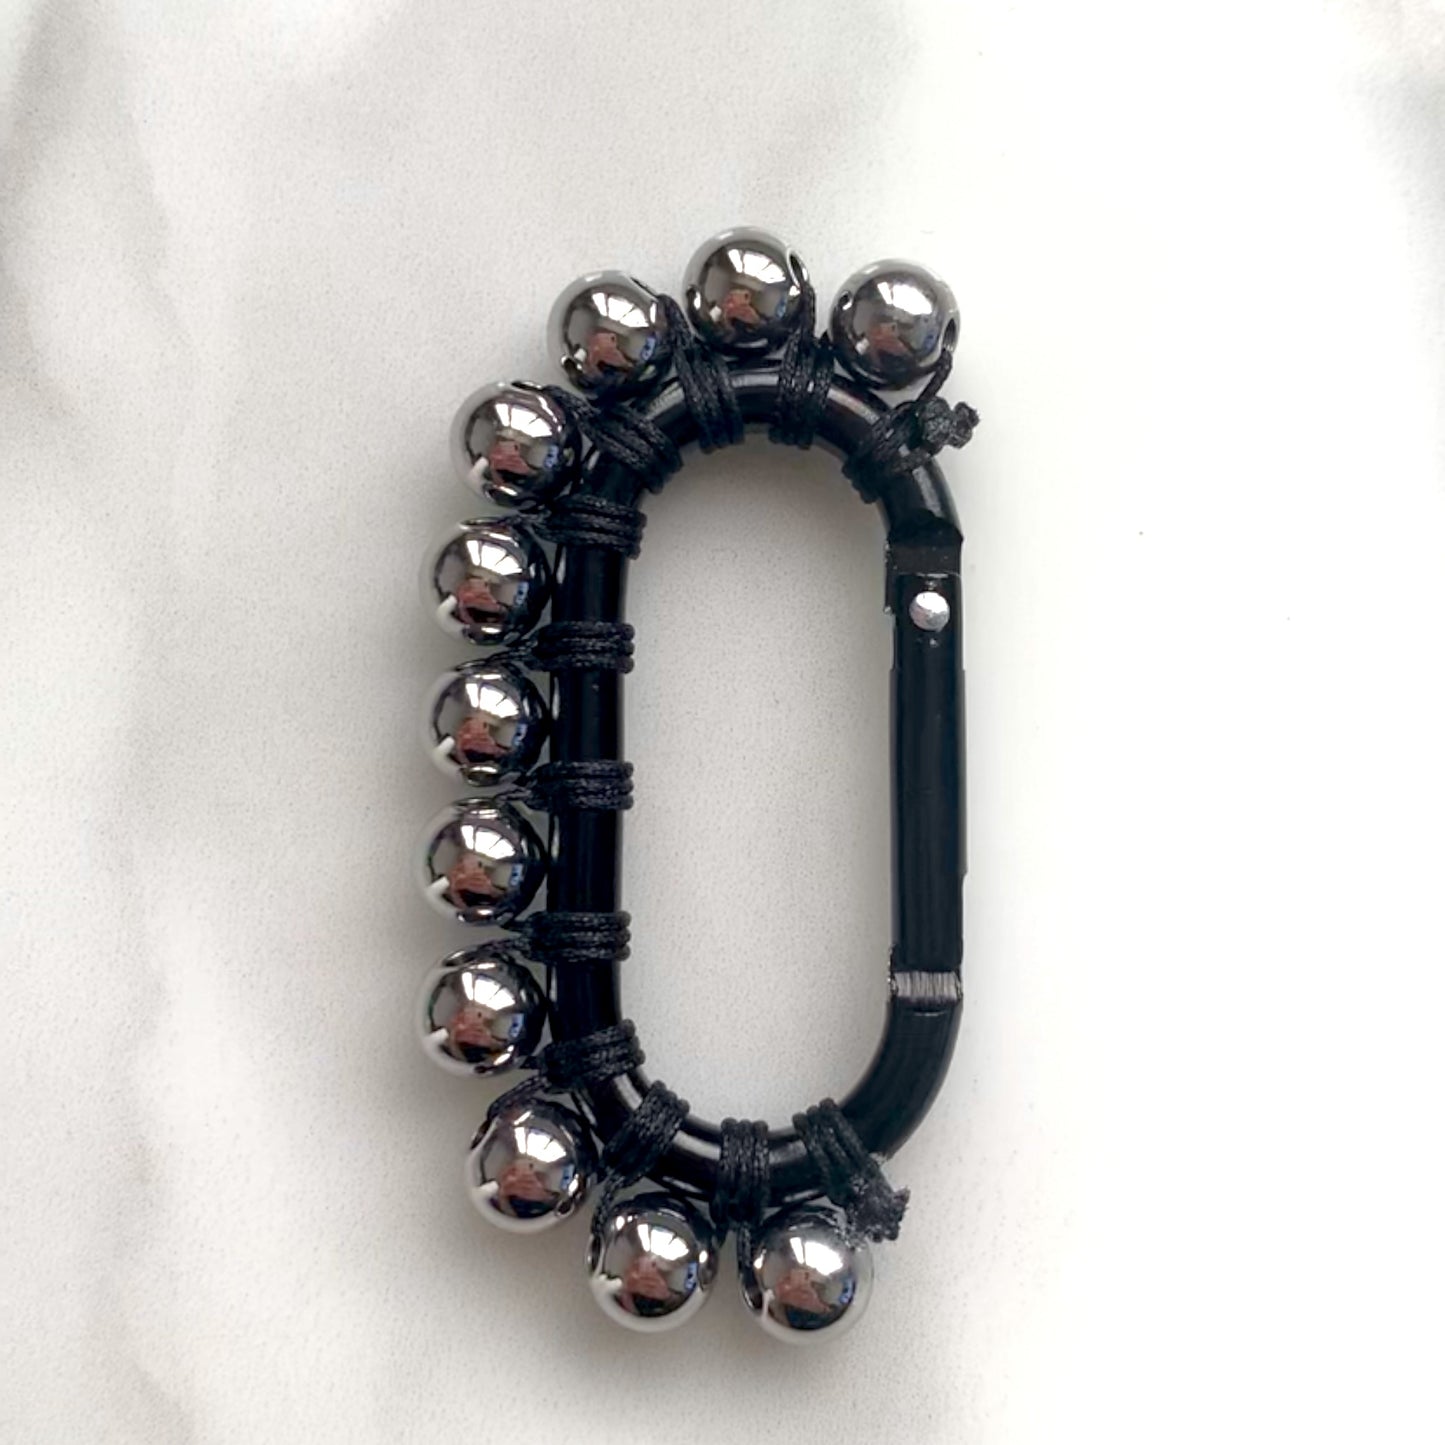 Carabiner - Size S